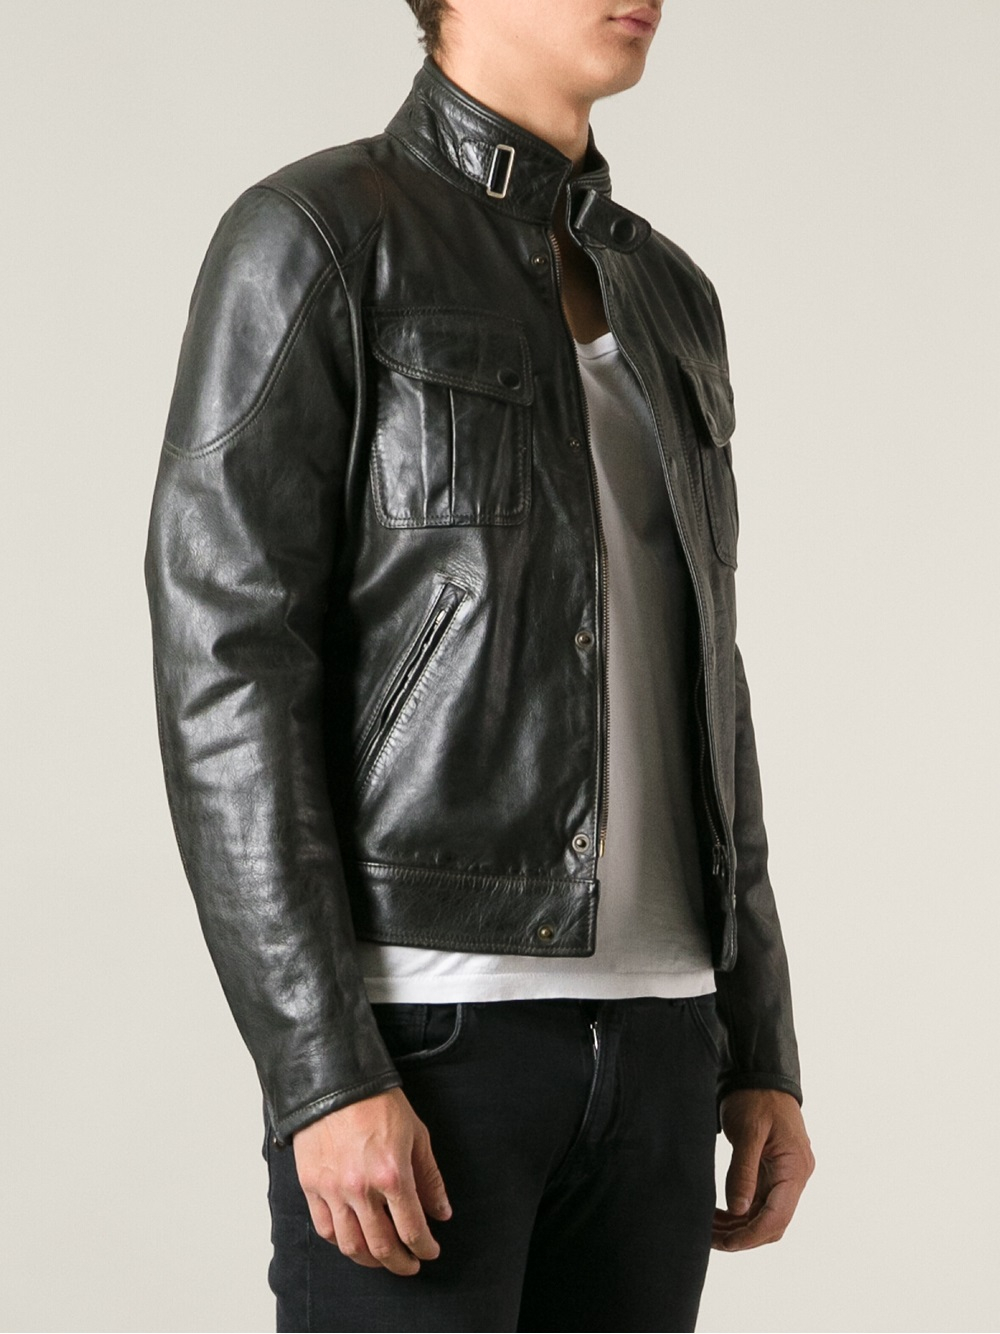 Lyst - Matchless Silverstone Jacket in Black for Men